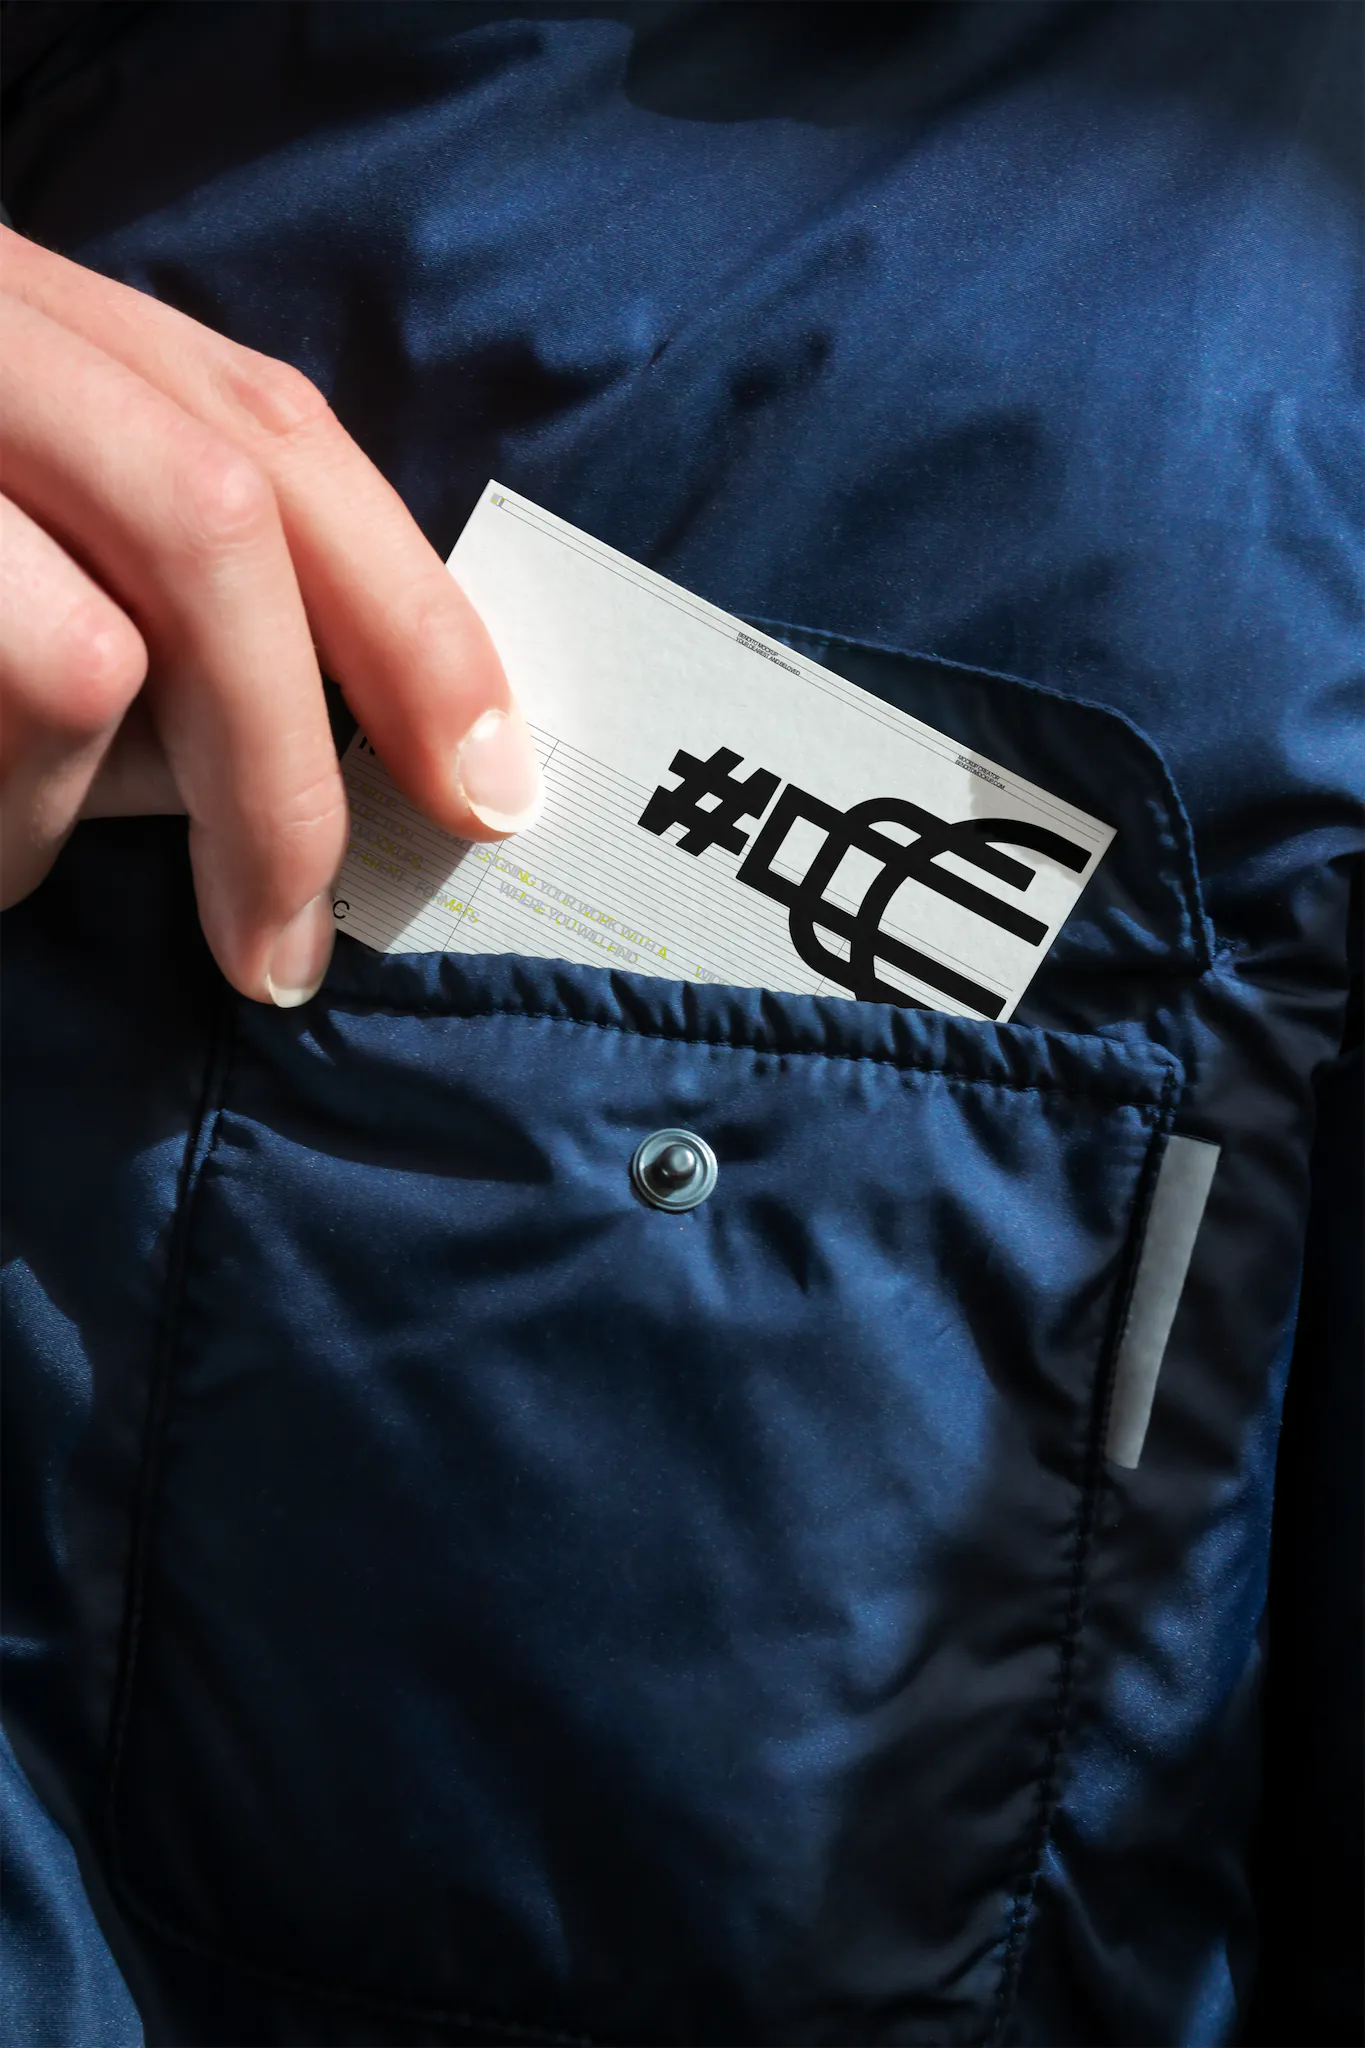 Business card mockup of a man taking out a business card of his jacket pocket. Branding mockup.